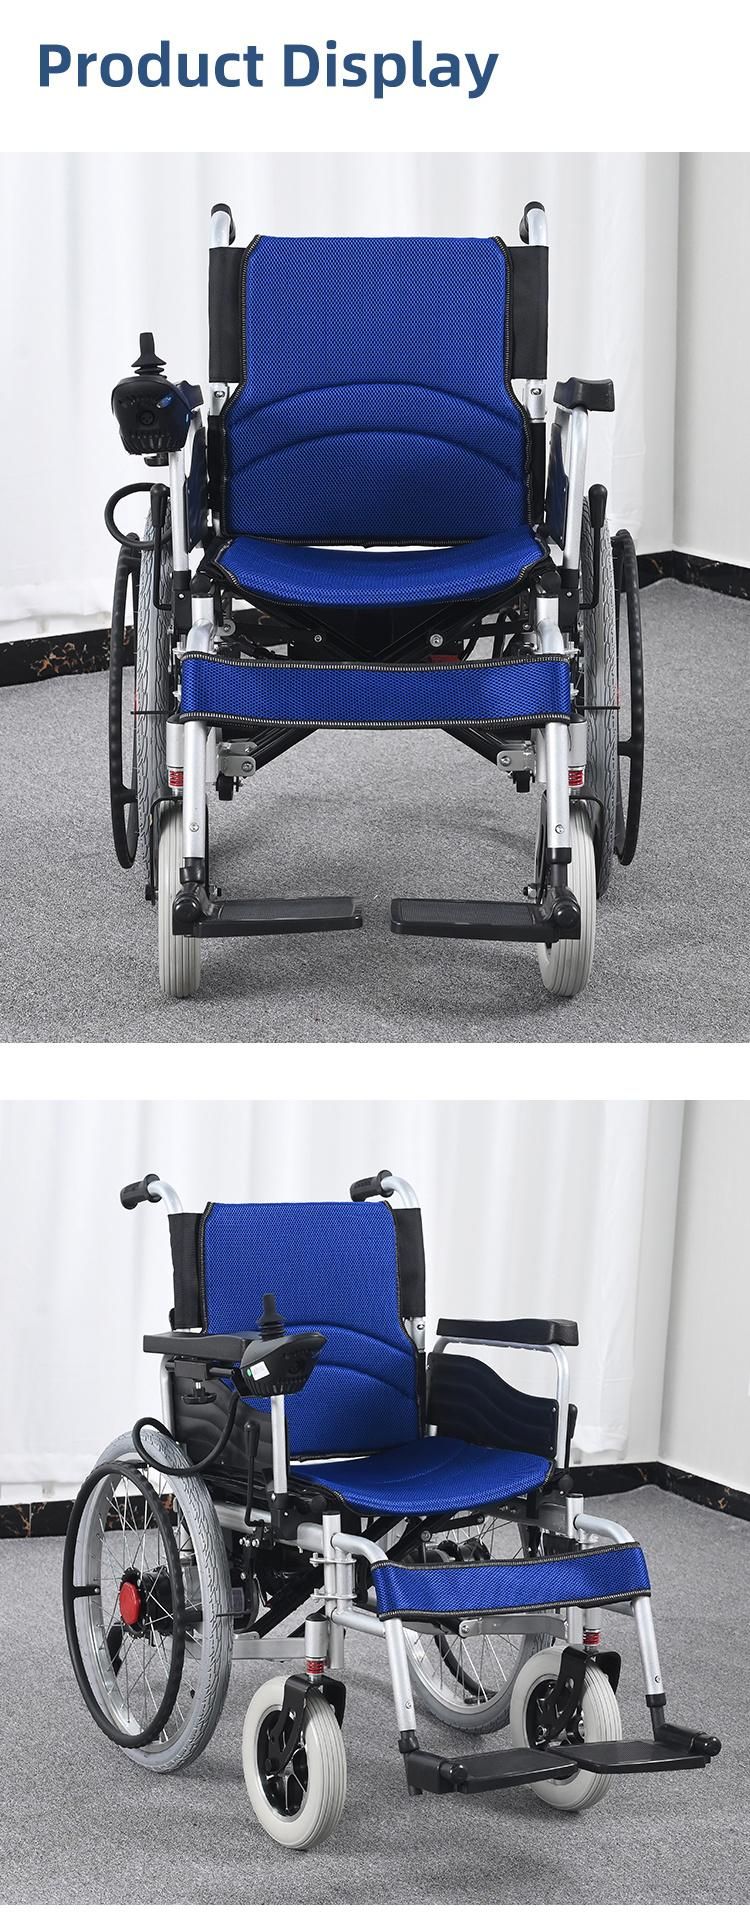 Hot Selling Lightweight Portable and Foldable Power Electric Wheelchair